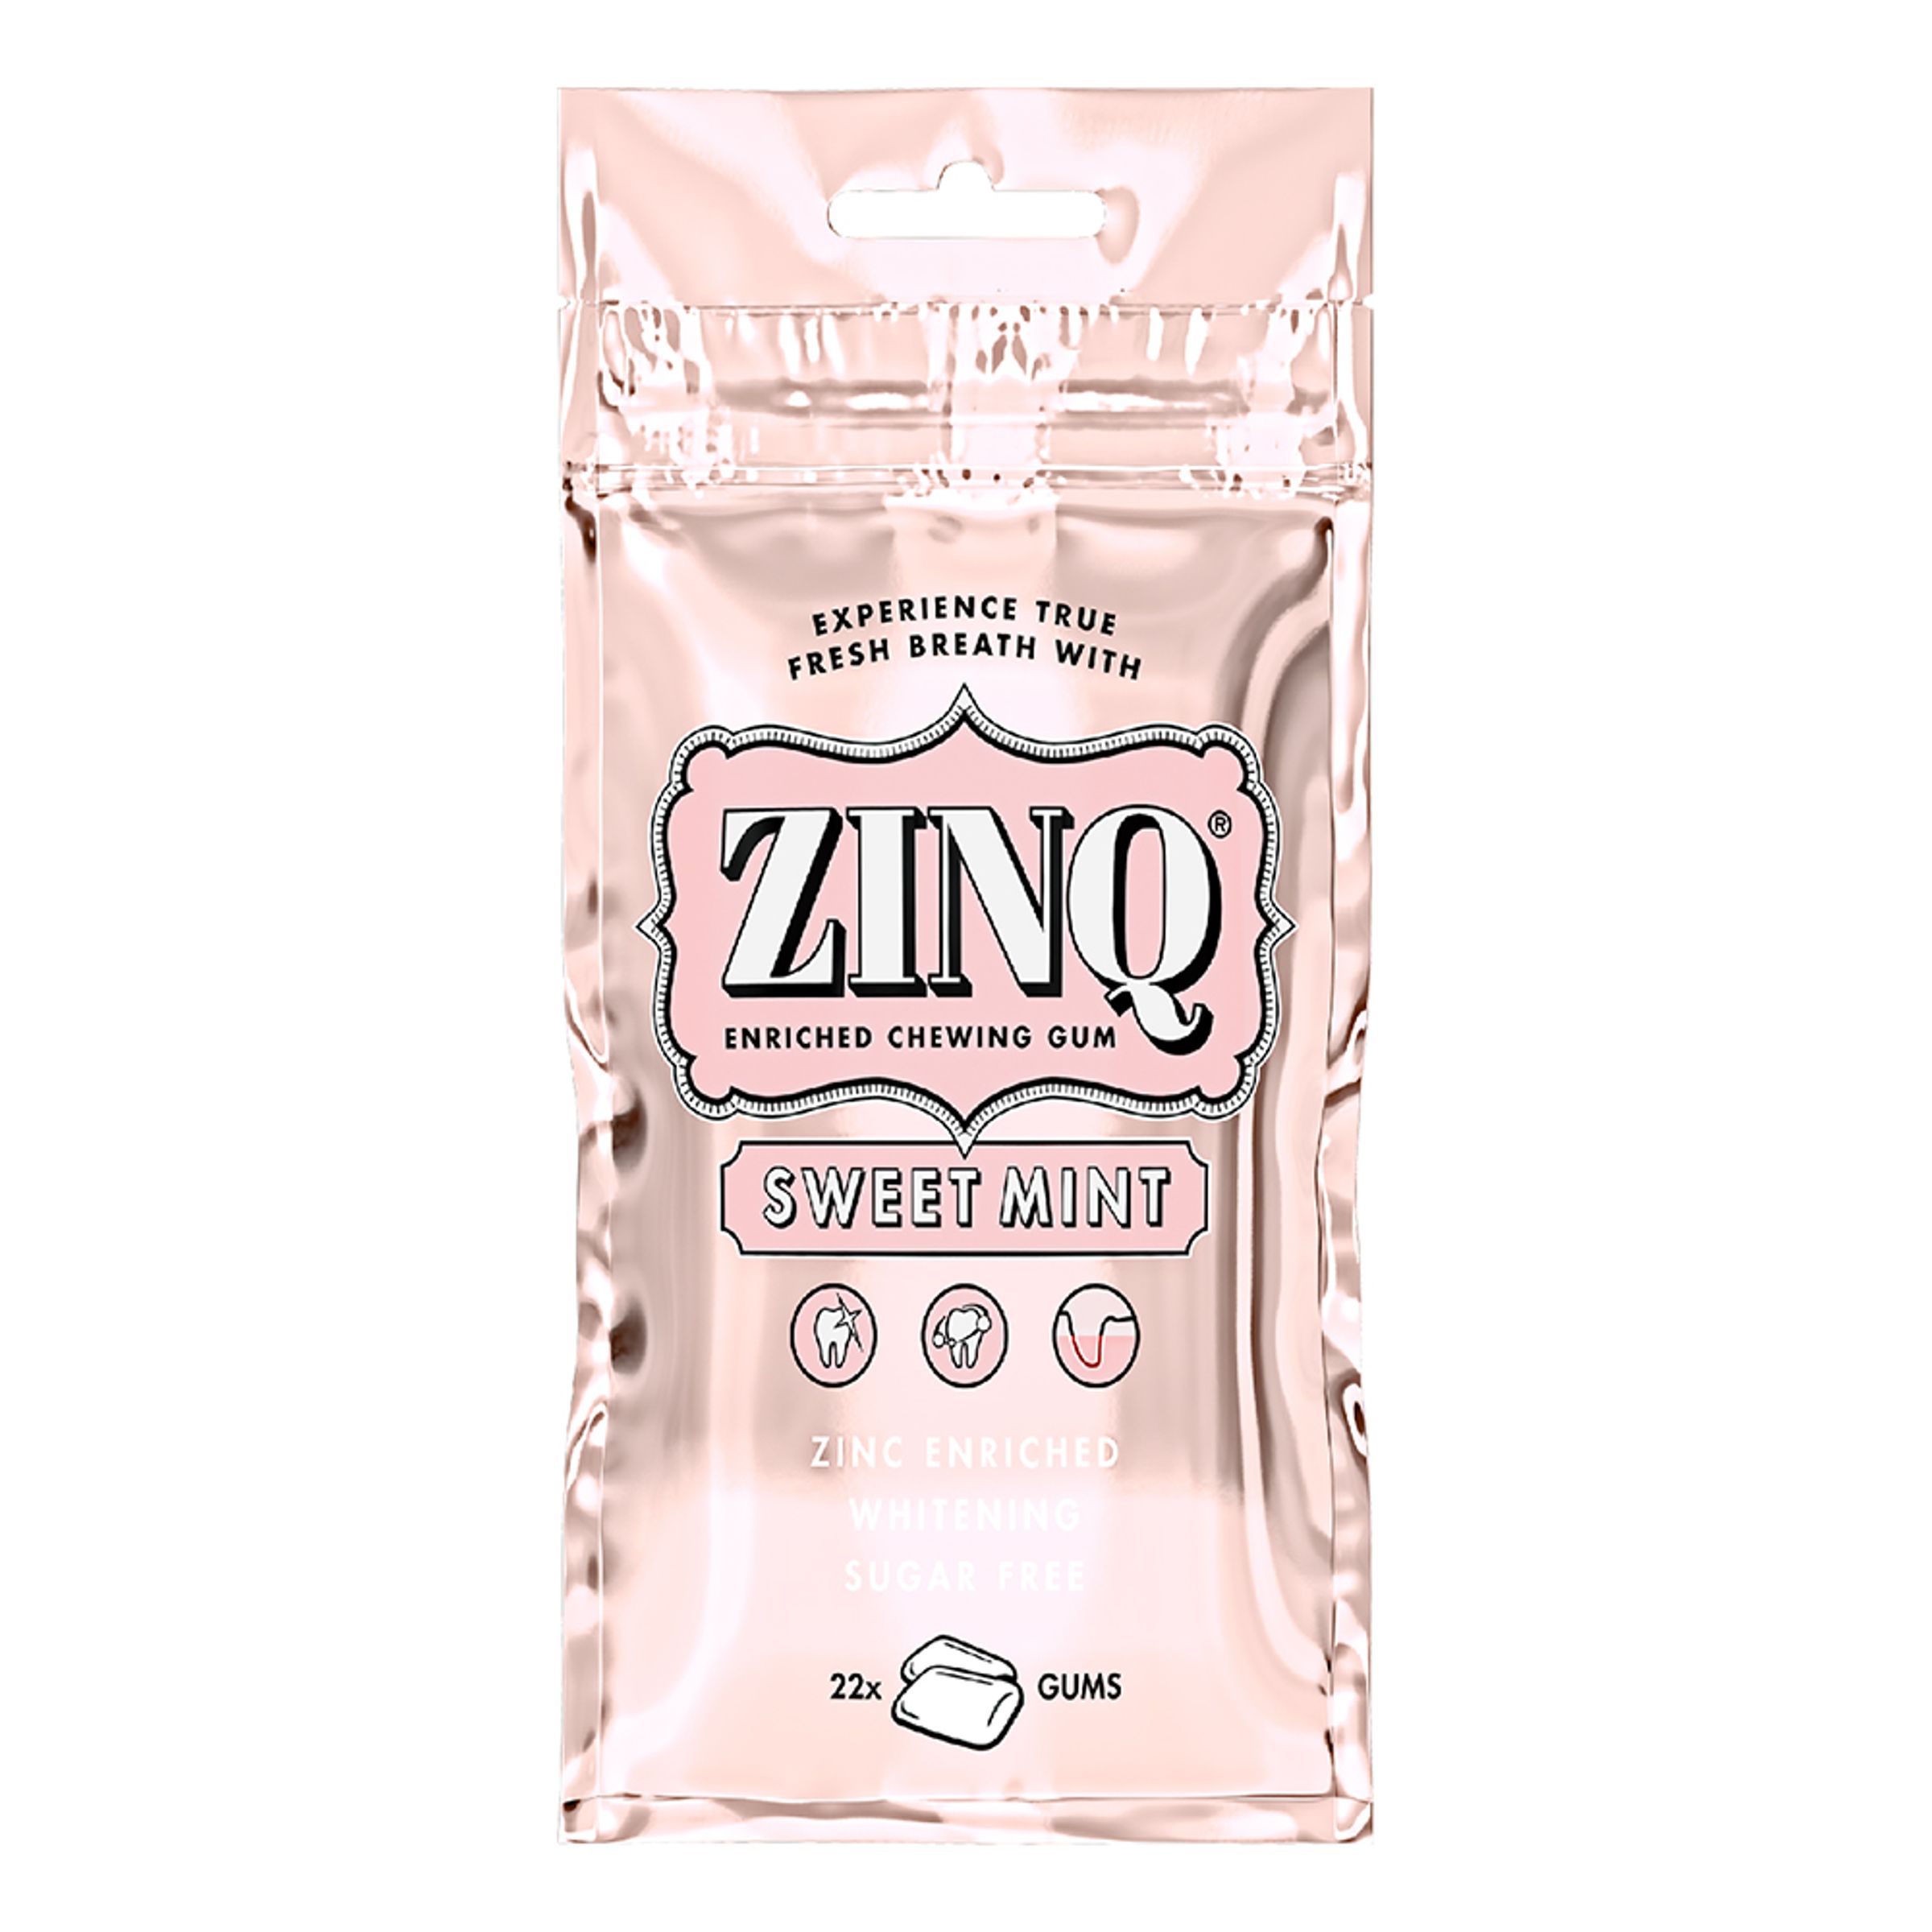 ZINQ Sweetmint Storpack - 15-pack